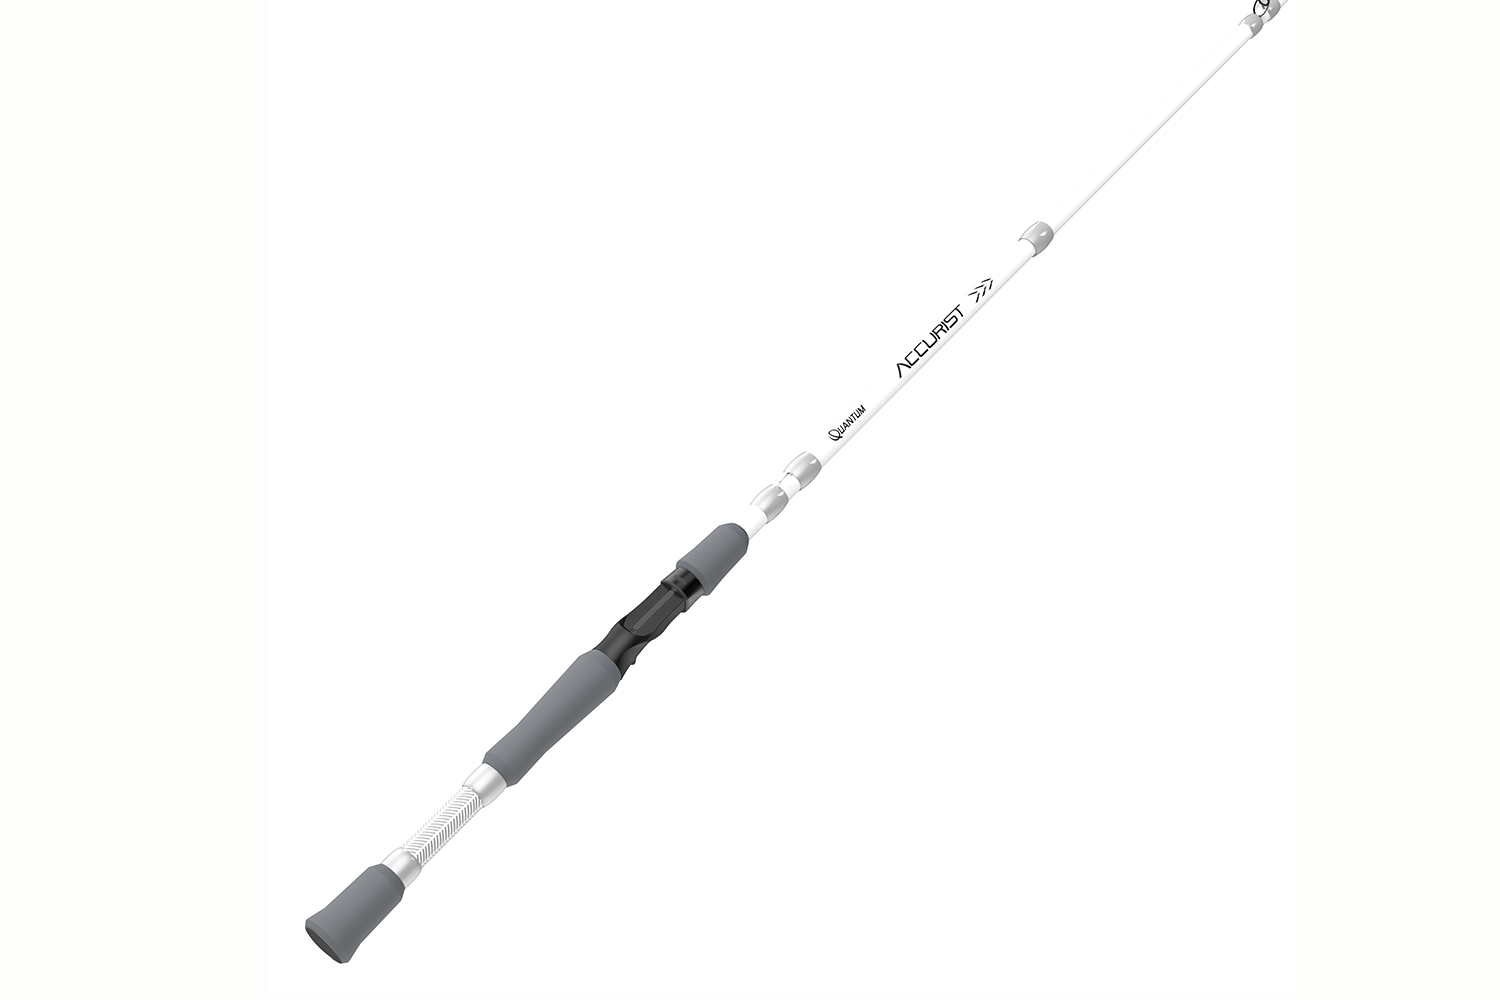 <p><b>Quantum Accurist Rod</b></p> MSRP: - $99.95 
Quantum has been making the industry's best cranking rod for years. We are now bringing the same technology and advanced rod design to the Accurist family. The Accurist cranking rod is specifically designed with a custom blend of high-end graphite and fiberglass for unbeatable sensitivity. With the EGC4â¢ composite blank, durable EVA handle, stainless steel guides with aluminum oxide inserts and a graphite reel seat, this rod is made for long casts and huge catches.</p>
<p><a href=